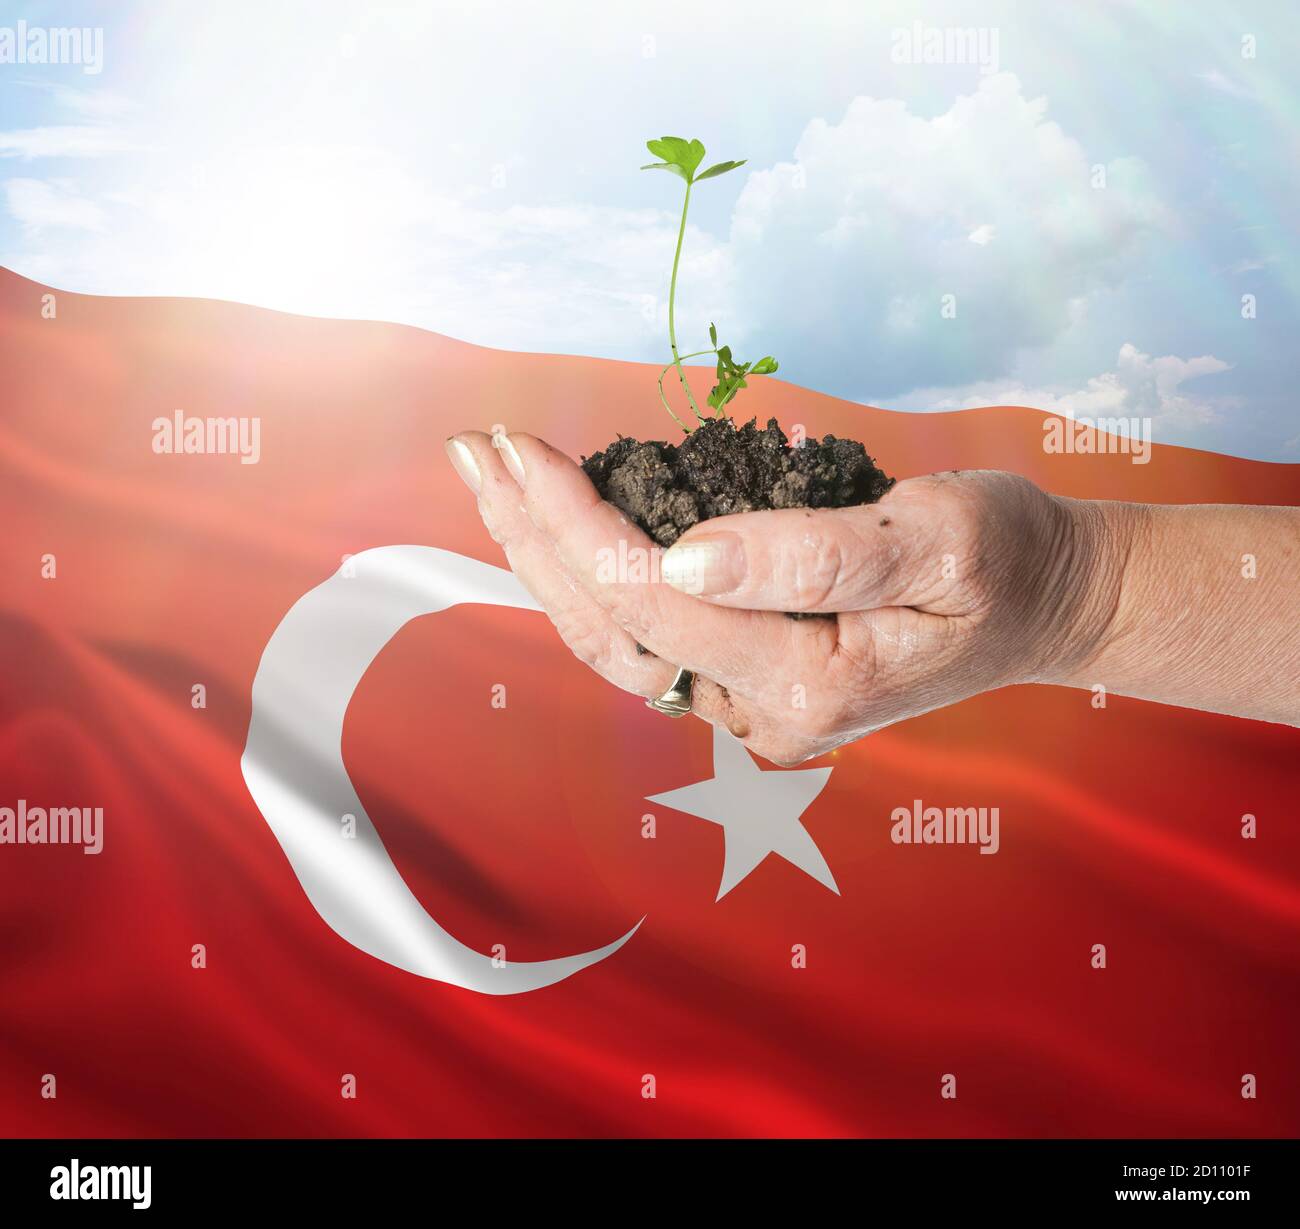 Turkey growth and new beginning. Green renewable energy and ecology concept. Hand holding young plant. Stock Photo